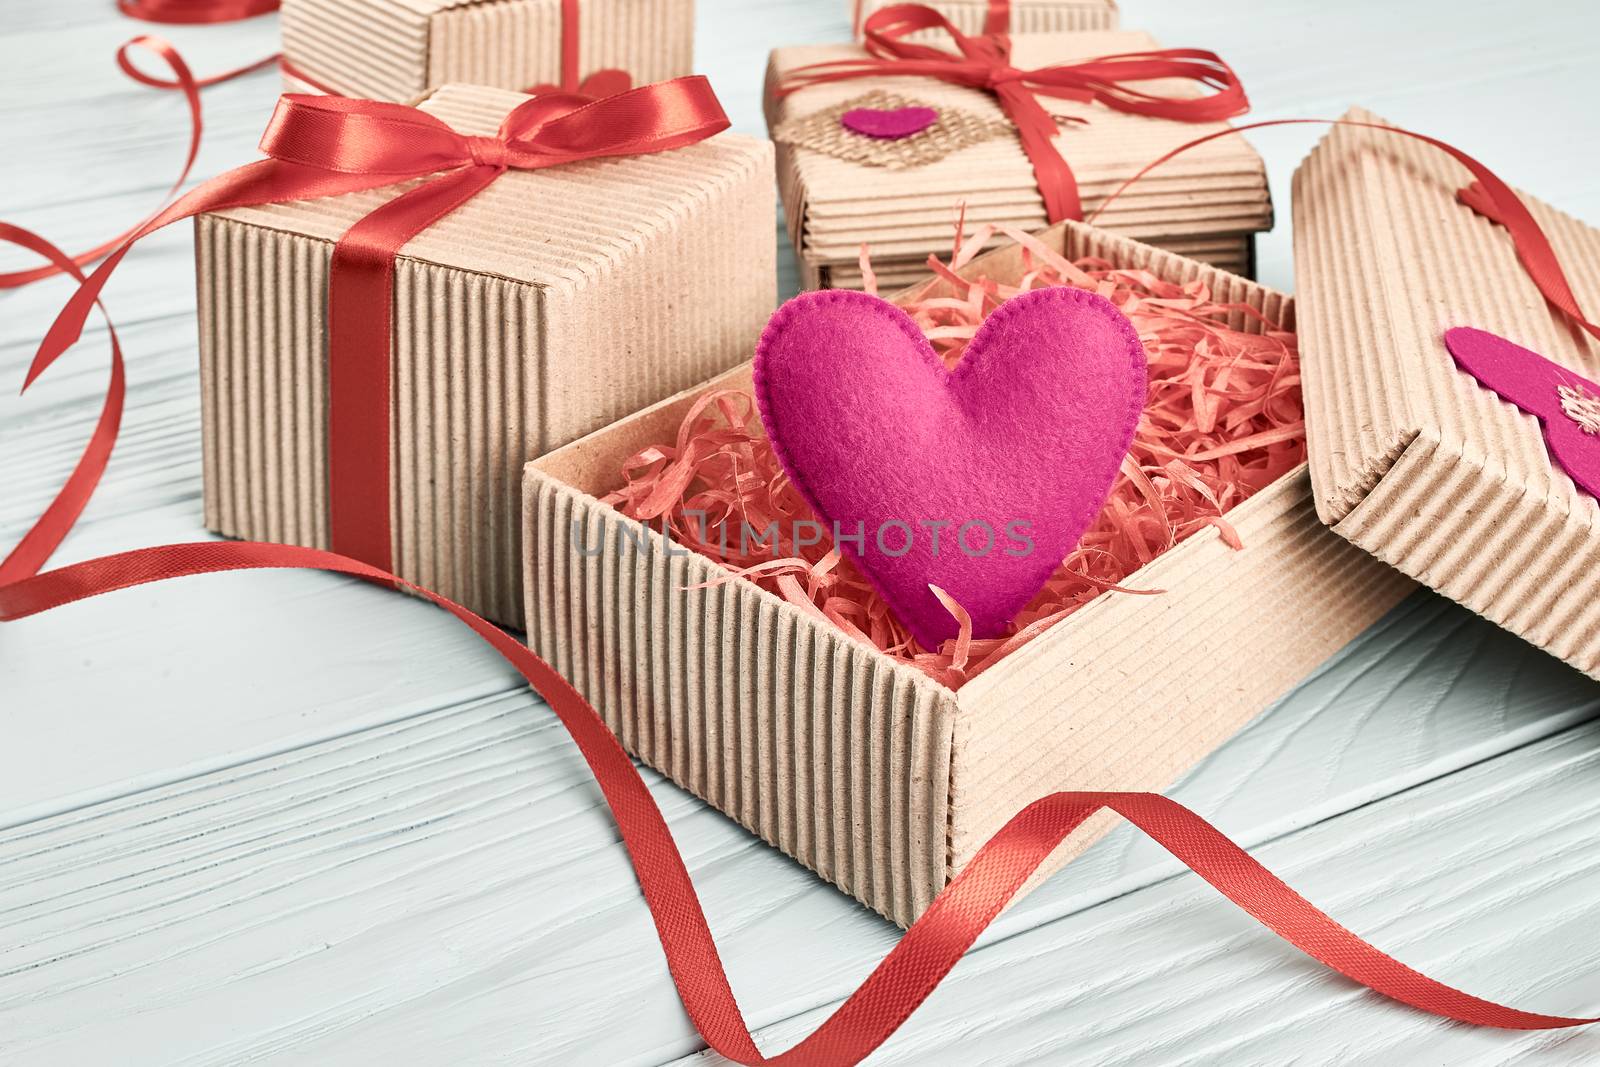 Valentines Day. Love hearts, gift boxes, presents stack. Handmade pink heart, red ribbons felt. Vintage retro romantic styled. Unusual creative art greeting card, wooden blue background, copyspace